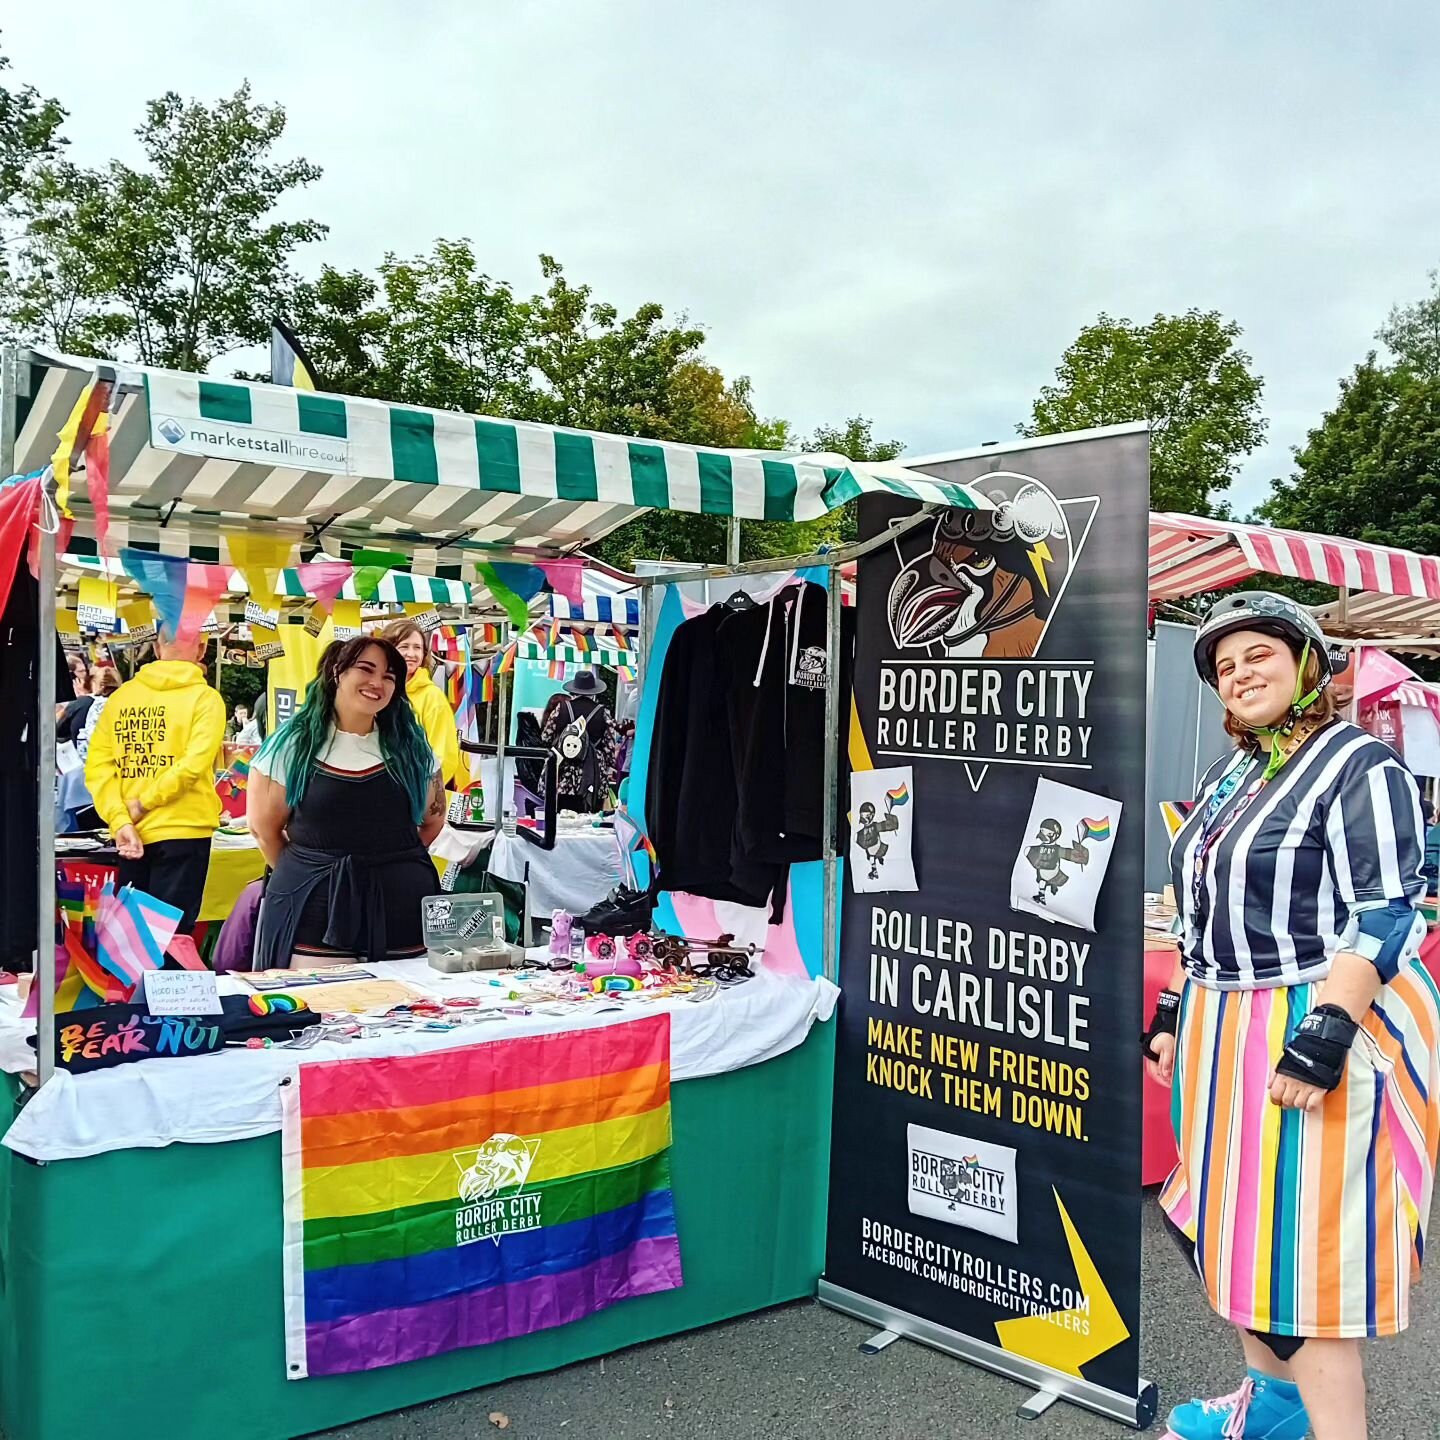 We had a fantastic time at Cumbria Pride on Saturday! Thanks to everyone who popped by to say hello and see what we're all about! 🏳️&zwj;🌈🏳️&zwj;⚧️🏳️&zwj;🌈

We are currently recruiting NSOs and Referees. Message the page for more details if you'